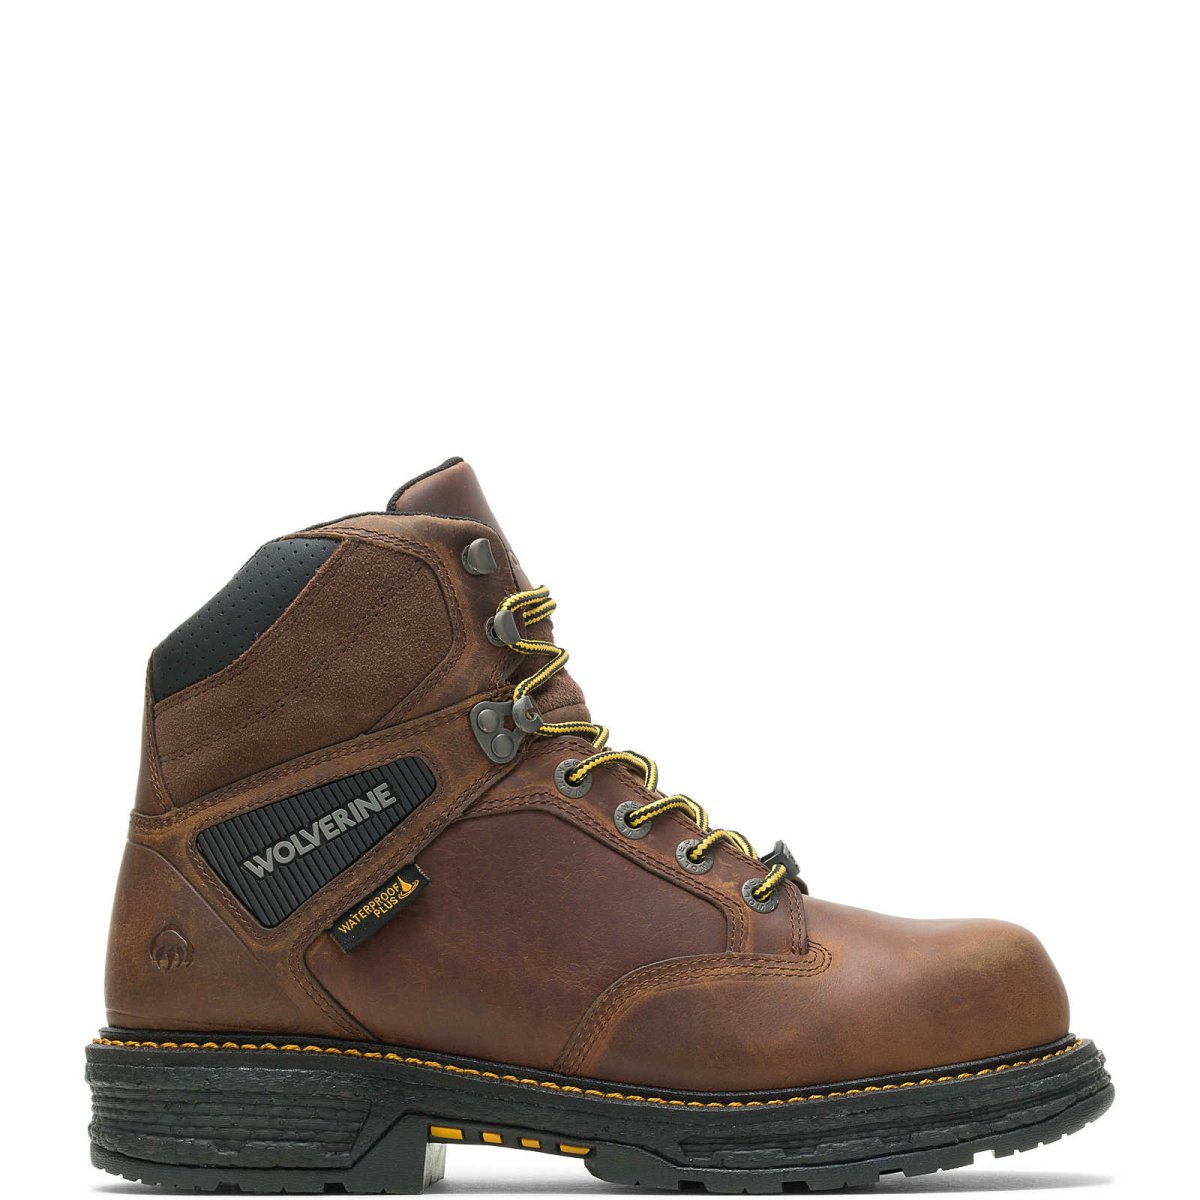 WOLVERINE HELLCAT 6" CM MEN'S SAFETY TOE WORK BOOT (W201175) IN TOBACCO - TLW Shoes